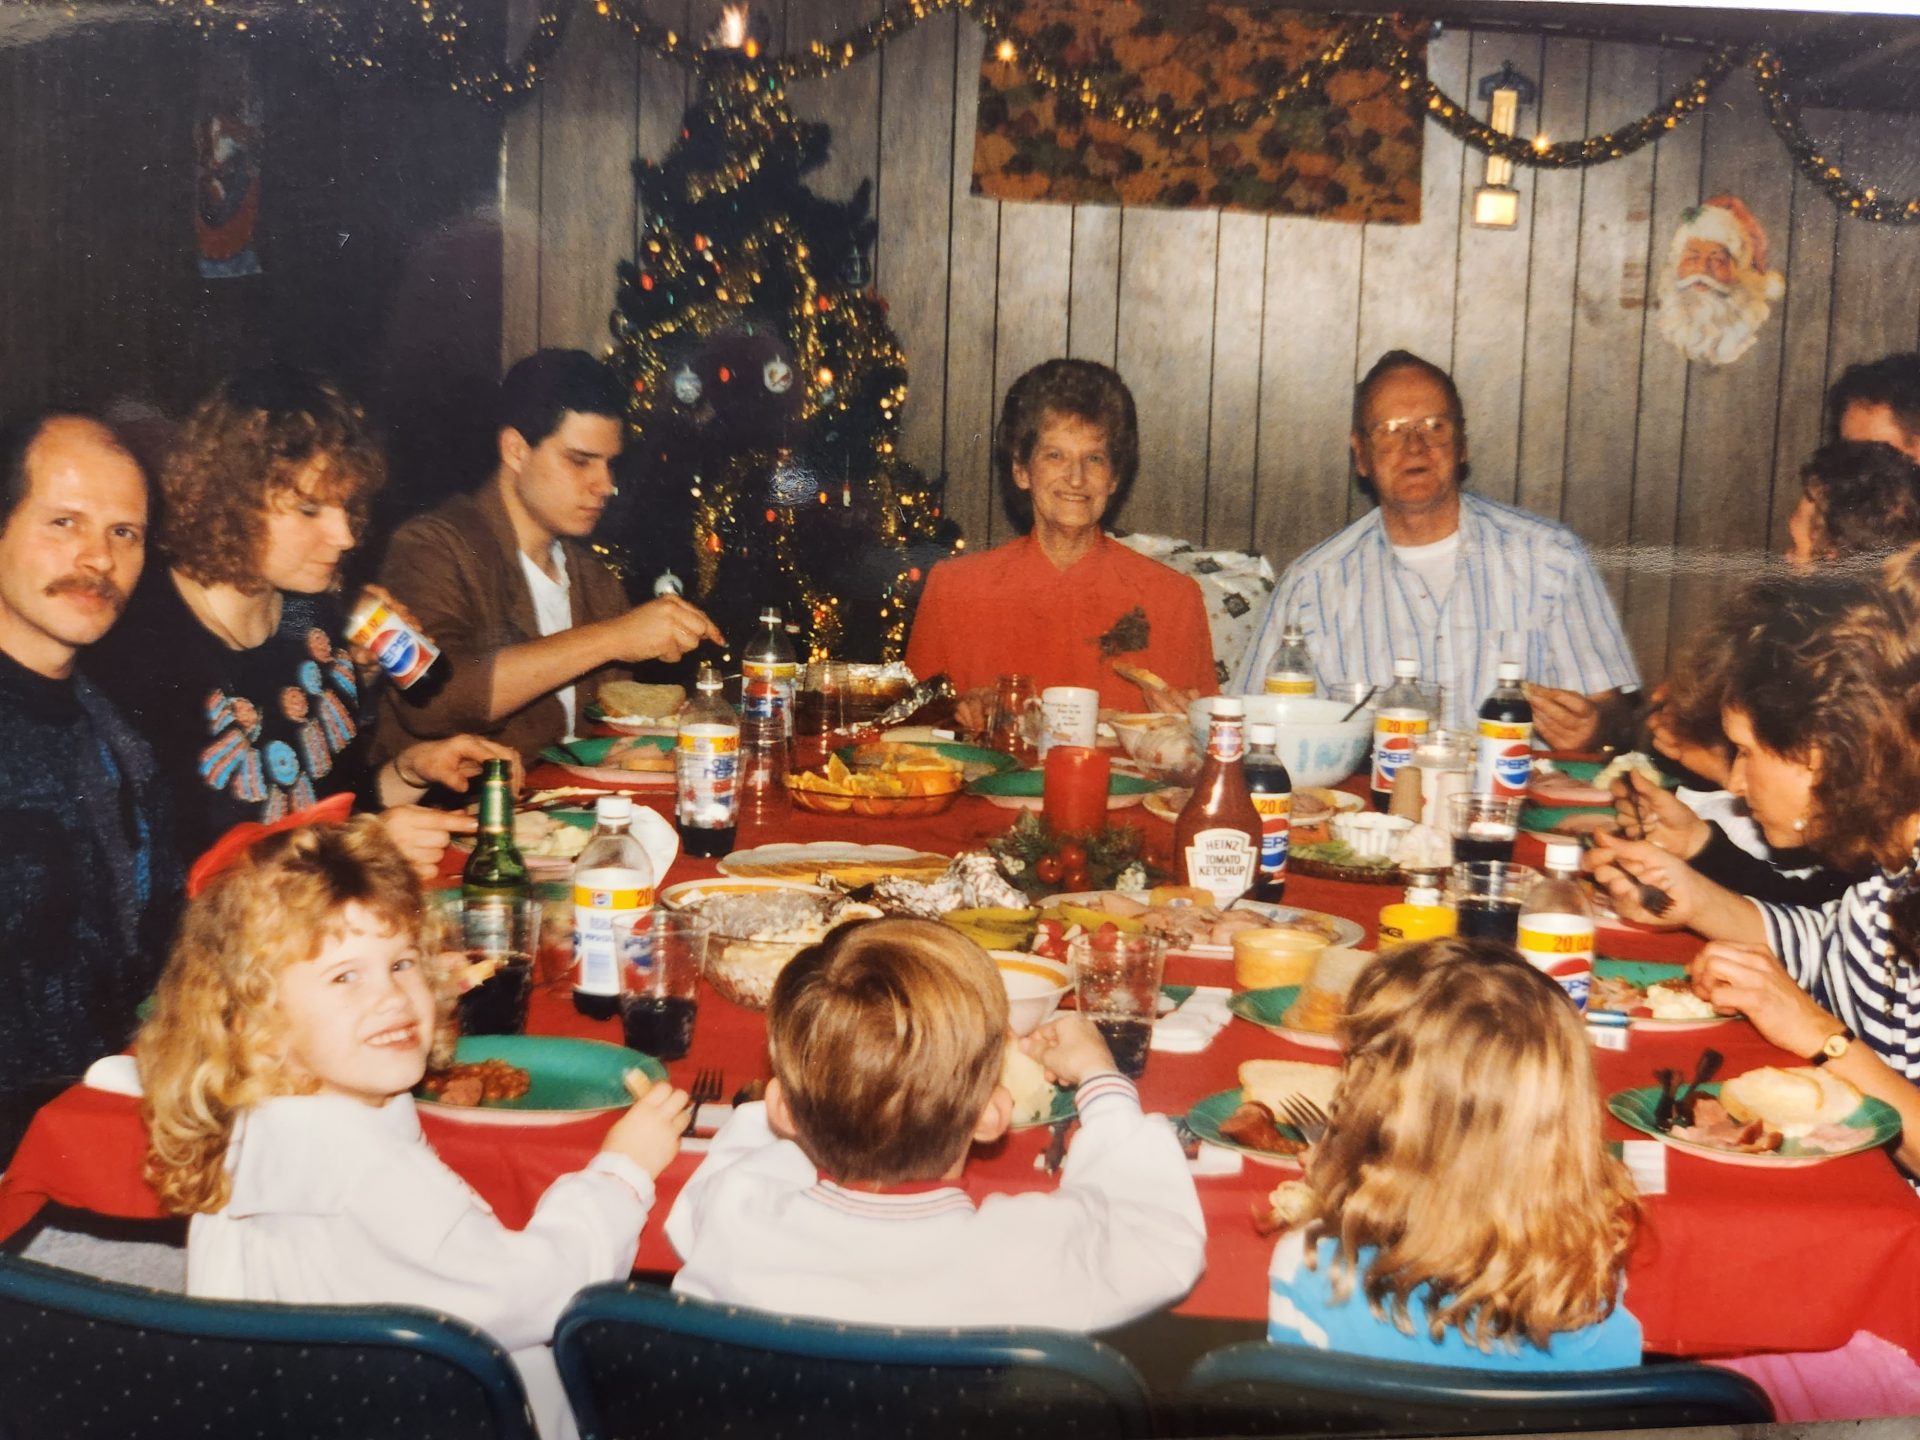 Blast from the past!  <br />
This was taken at our of our traditional Christmas Eve dinners with the Owen family.